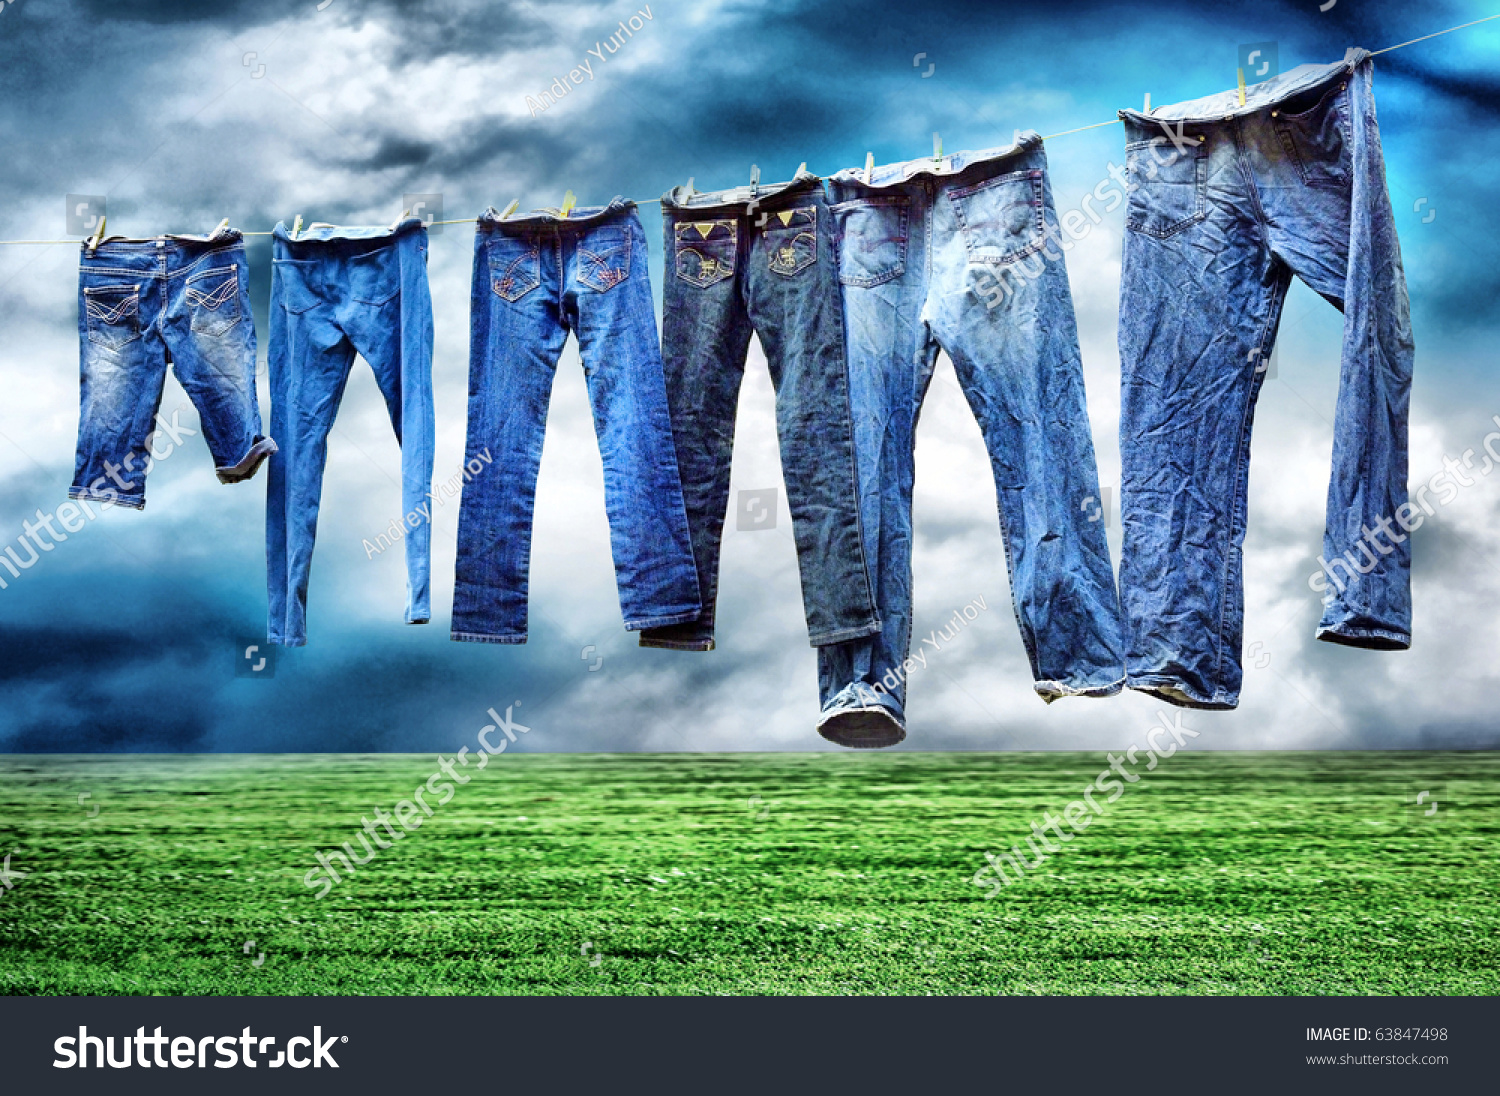 Jeans On A Clothesline To Dry Stock Photo 63847498 : Shutterstock